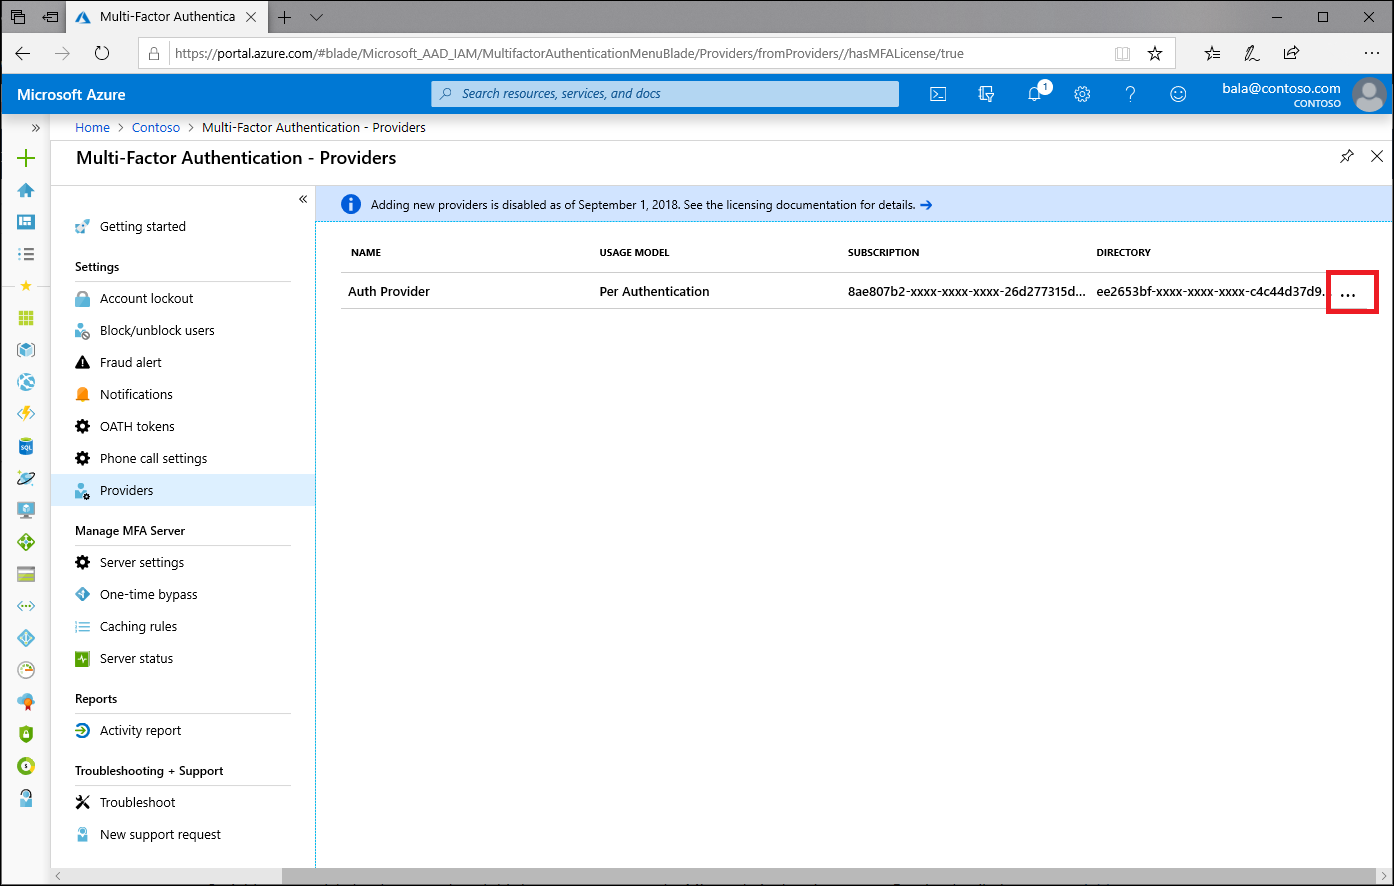 Delete an auth provider from the Azure portal